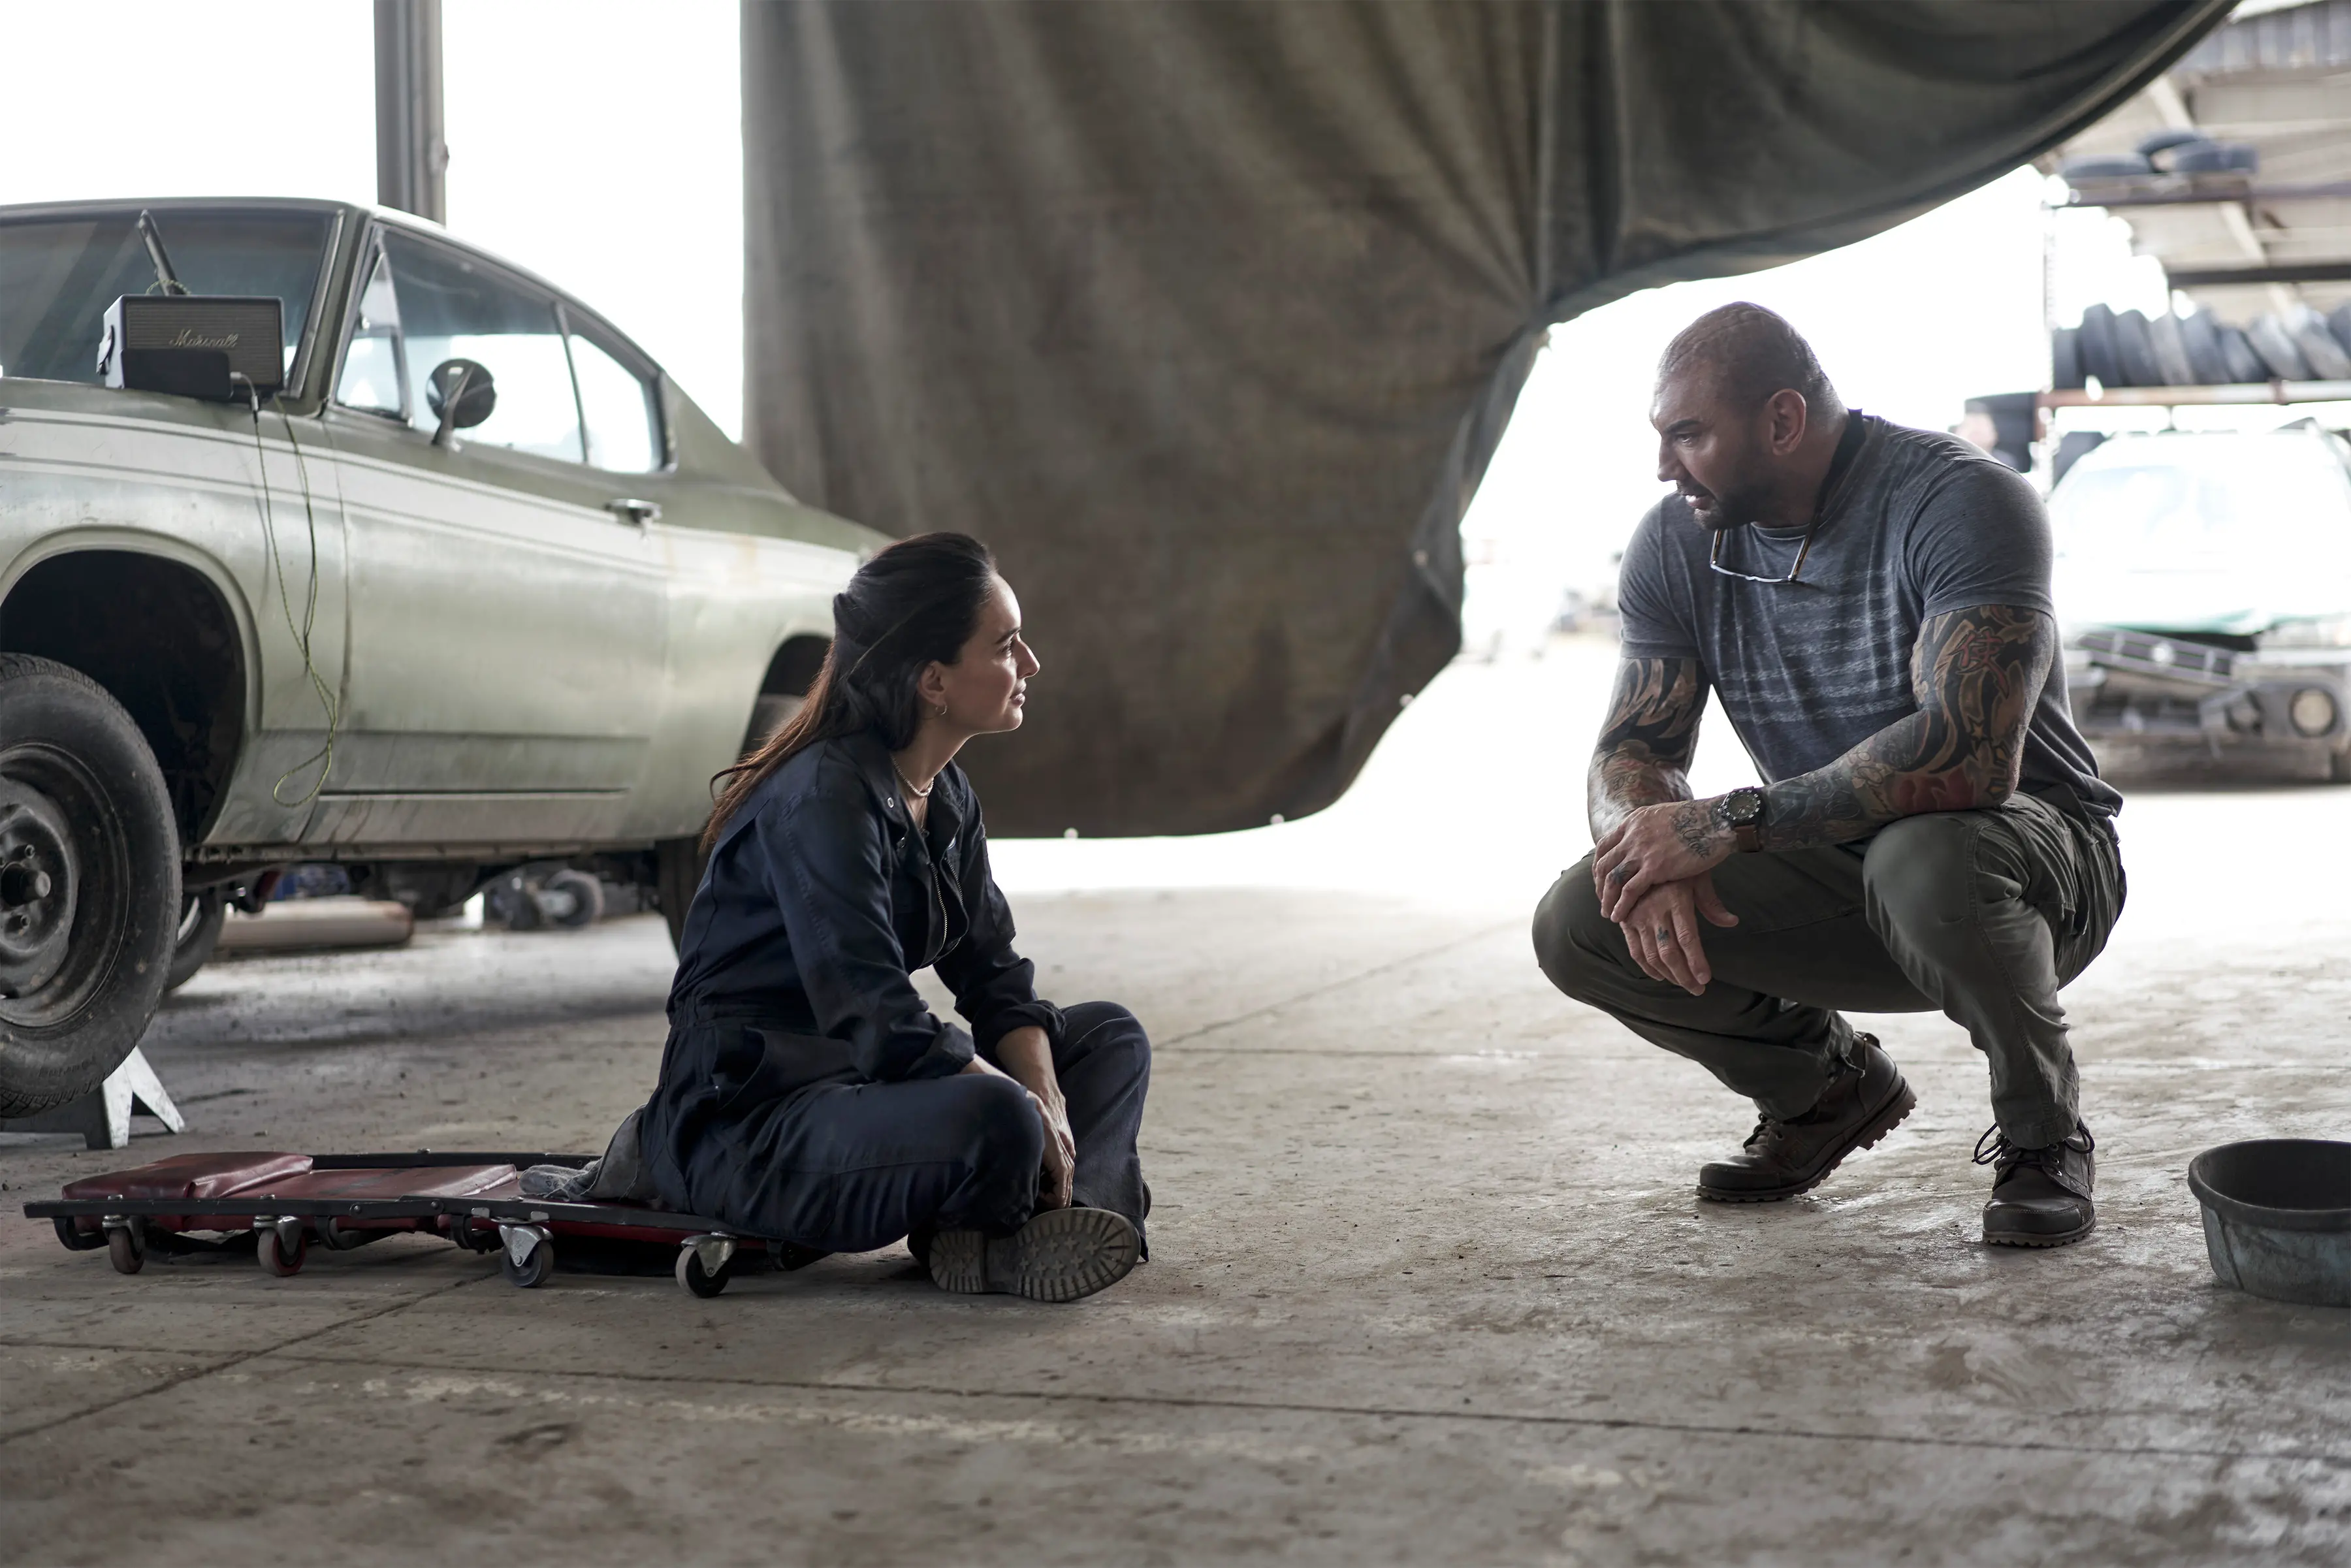 ARMY OF THE DEAD (L to R)  ANA DE LA REGUERA as CRUZ and Dave Bautista as Scott Ward in ARMY OF THE DEAD. Cr. CLAY ENOS/NETFLIX © 2021